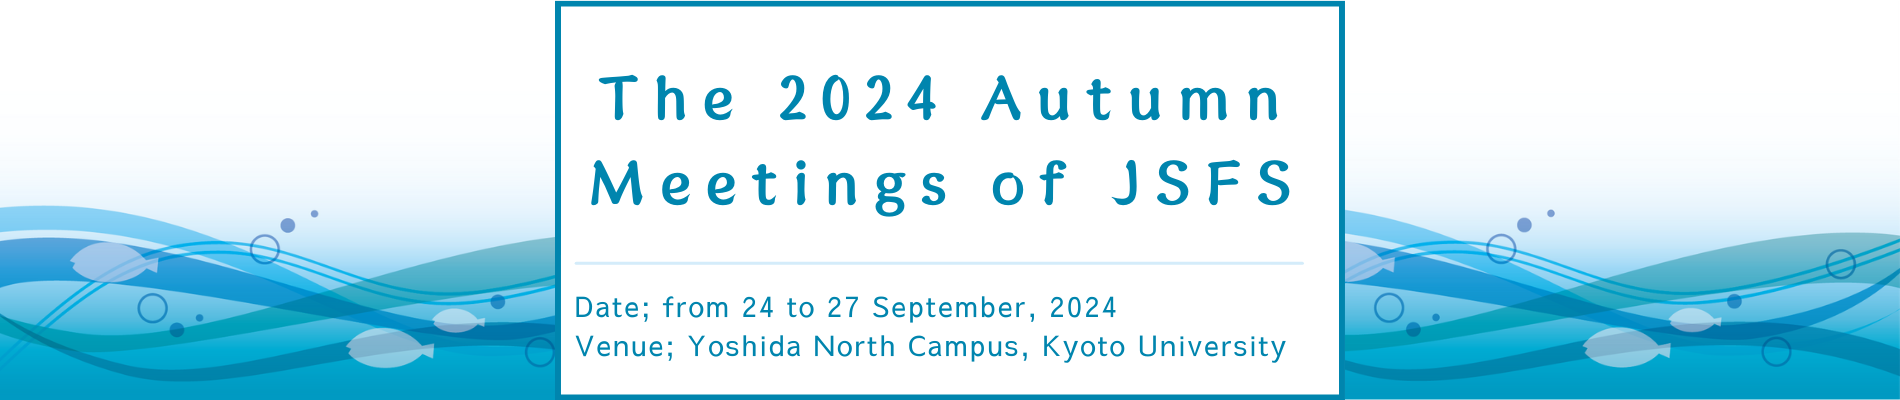 The 2024 Autumn Meetings of JSFS